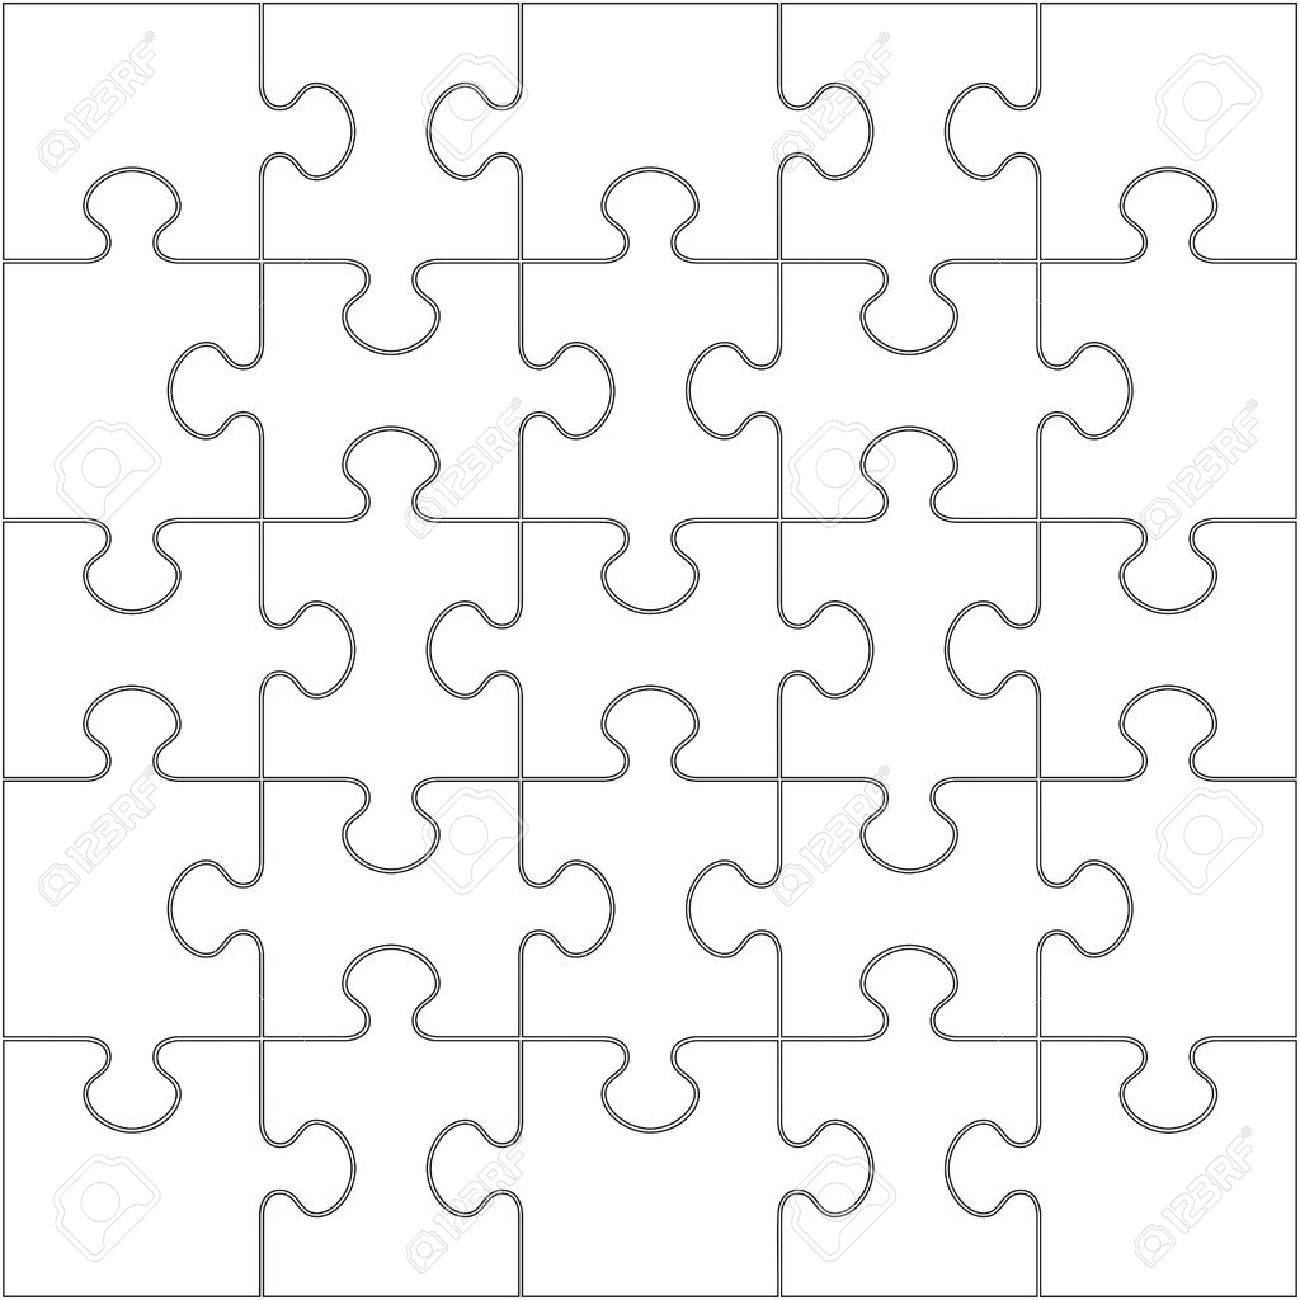 How To Draw Puzzle Pieces Google Search Puzzle Piece Template Images